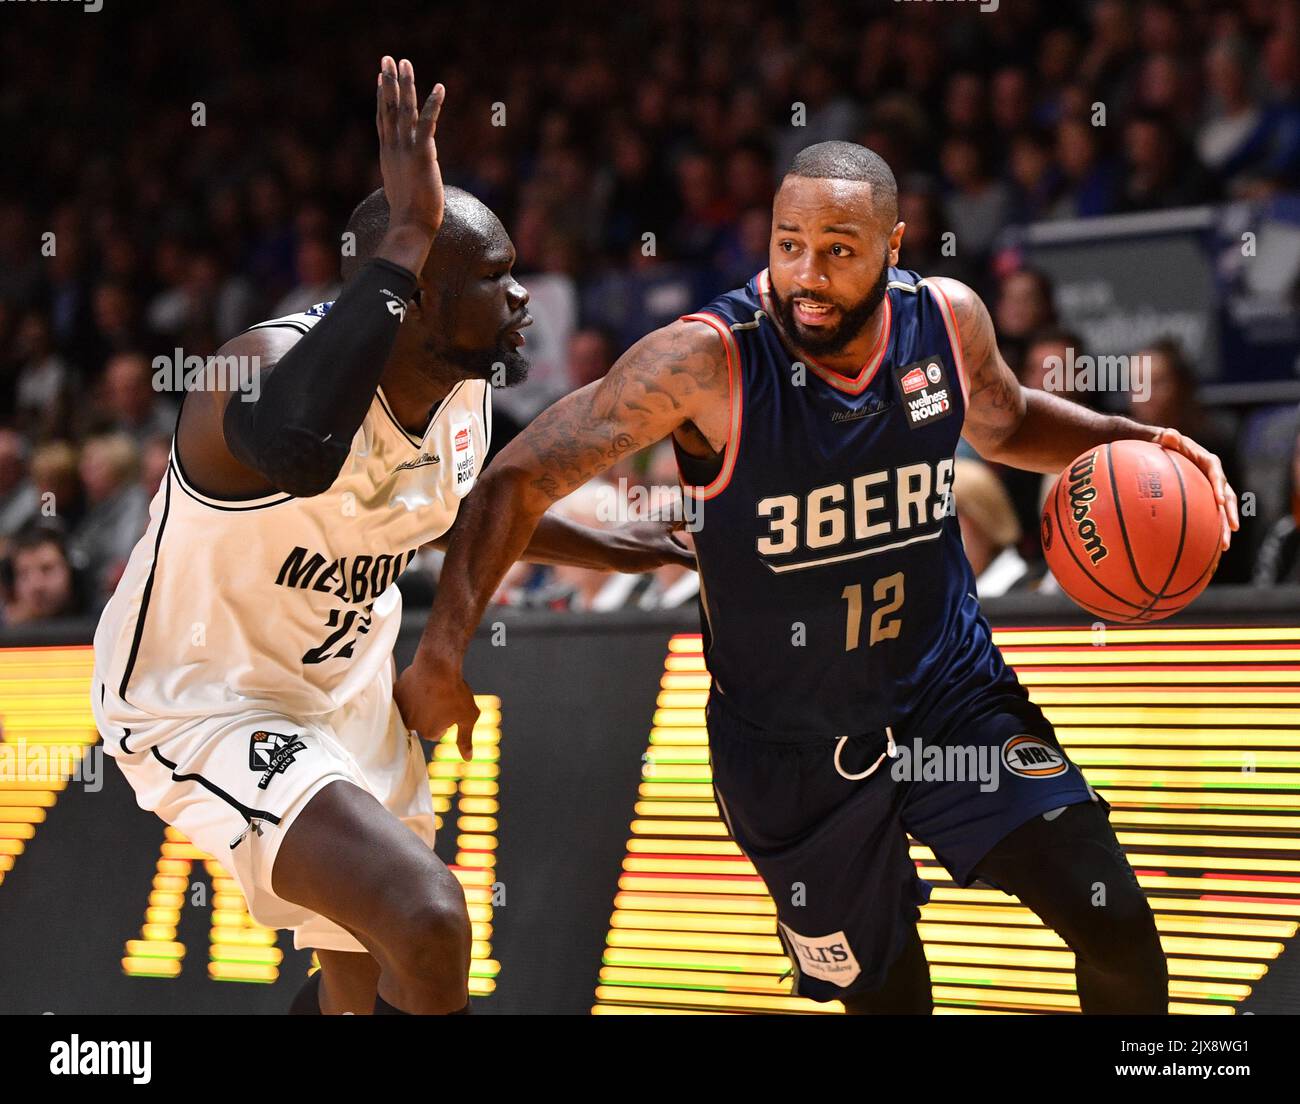 Shannon Shorter of the Adelaide 36ers and Majok Majok from Melbourne United  in action during Round 1 NBL match between the Adelaide 36'ers and Melbourne  United at Titanium Security Arena in Adelaide,